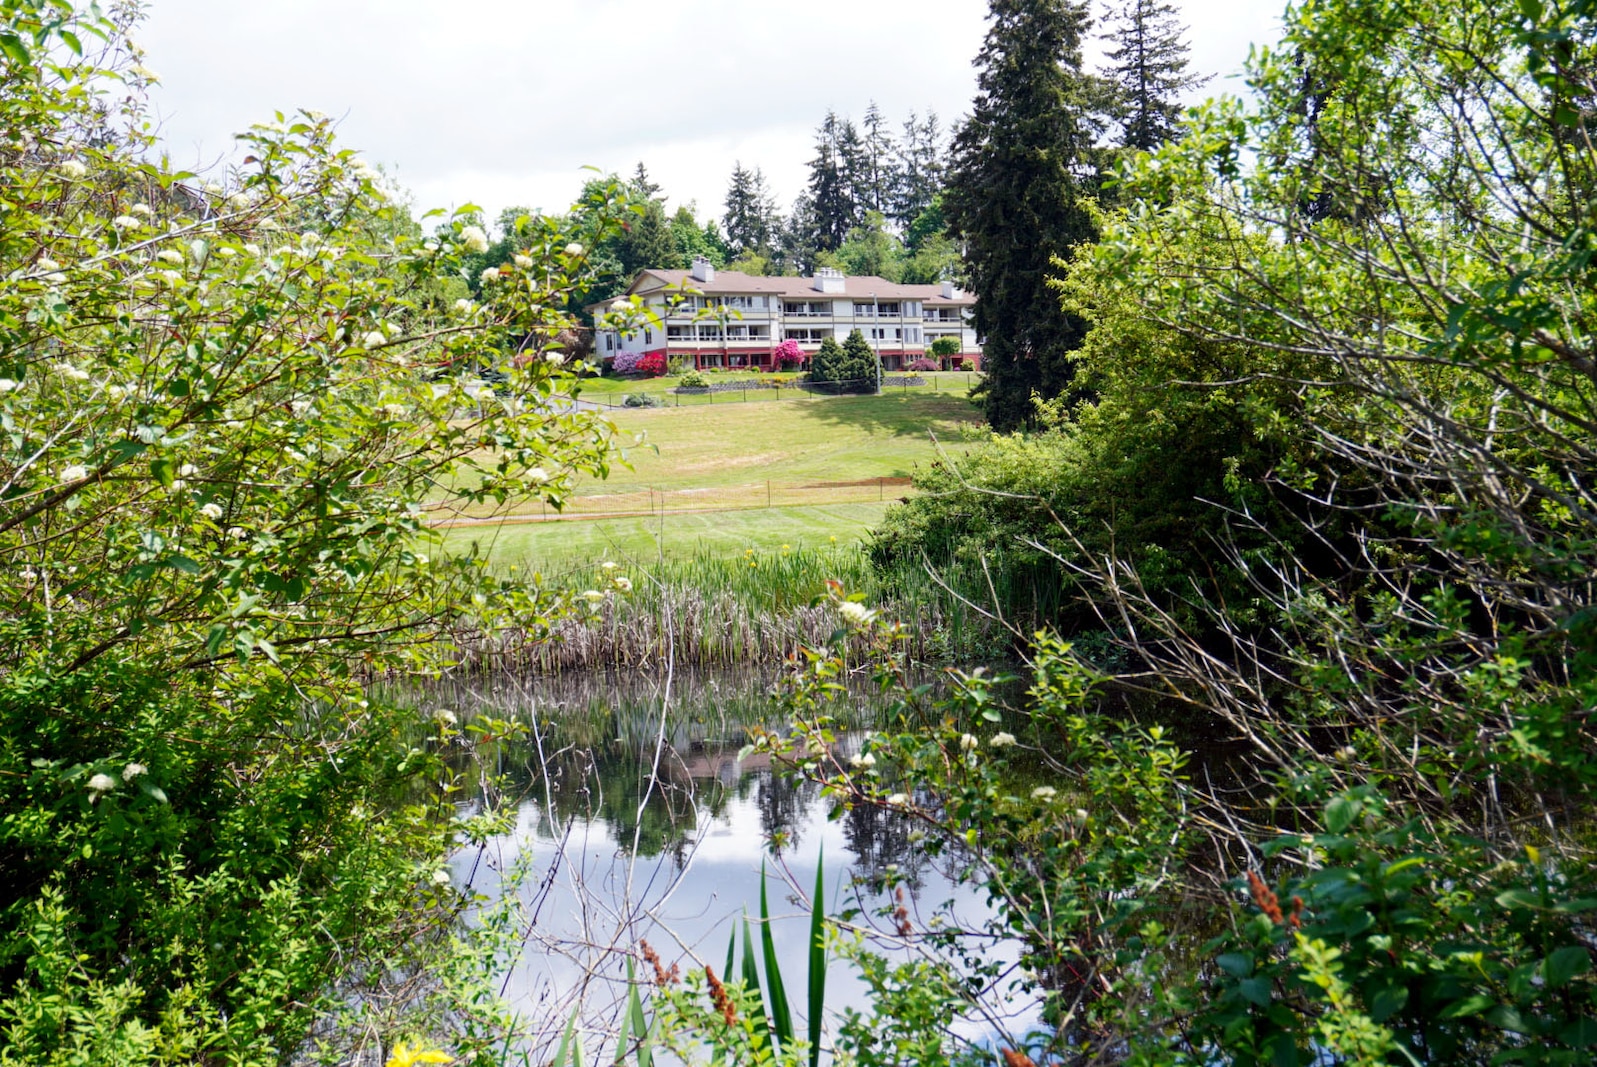 Photo of the Lake Ballinger Center, known locally as Mountlake Terrace Community Senior Center, with Ballinger Creek in the foreground, Mountlake Terrace, Washington, where construction to restore the fish and wildlife habitat for over 16 acres of a former golf course, began mid-May 2023 and will run through spring 2024. The $5.5 million project construction cost, of which $3.4 million comes from Bipartisan Infrastructure Law (BIL) funding that President Joseph R. Biden signed into law in November 2021, includes creating a wetted creek channel, removing invasive plants, and installing a diverse array of plants.